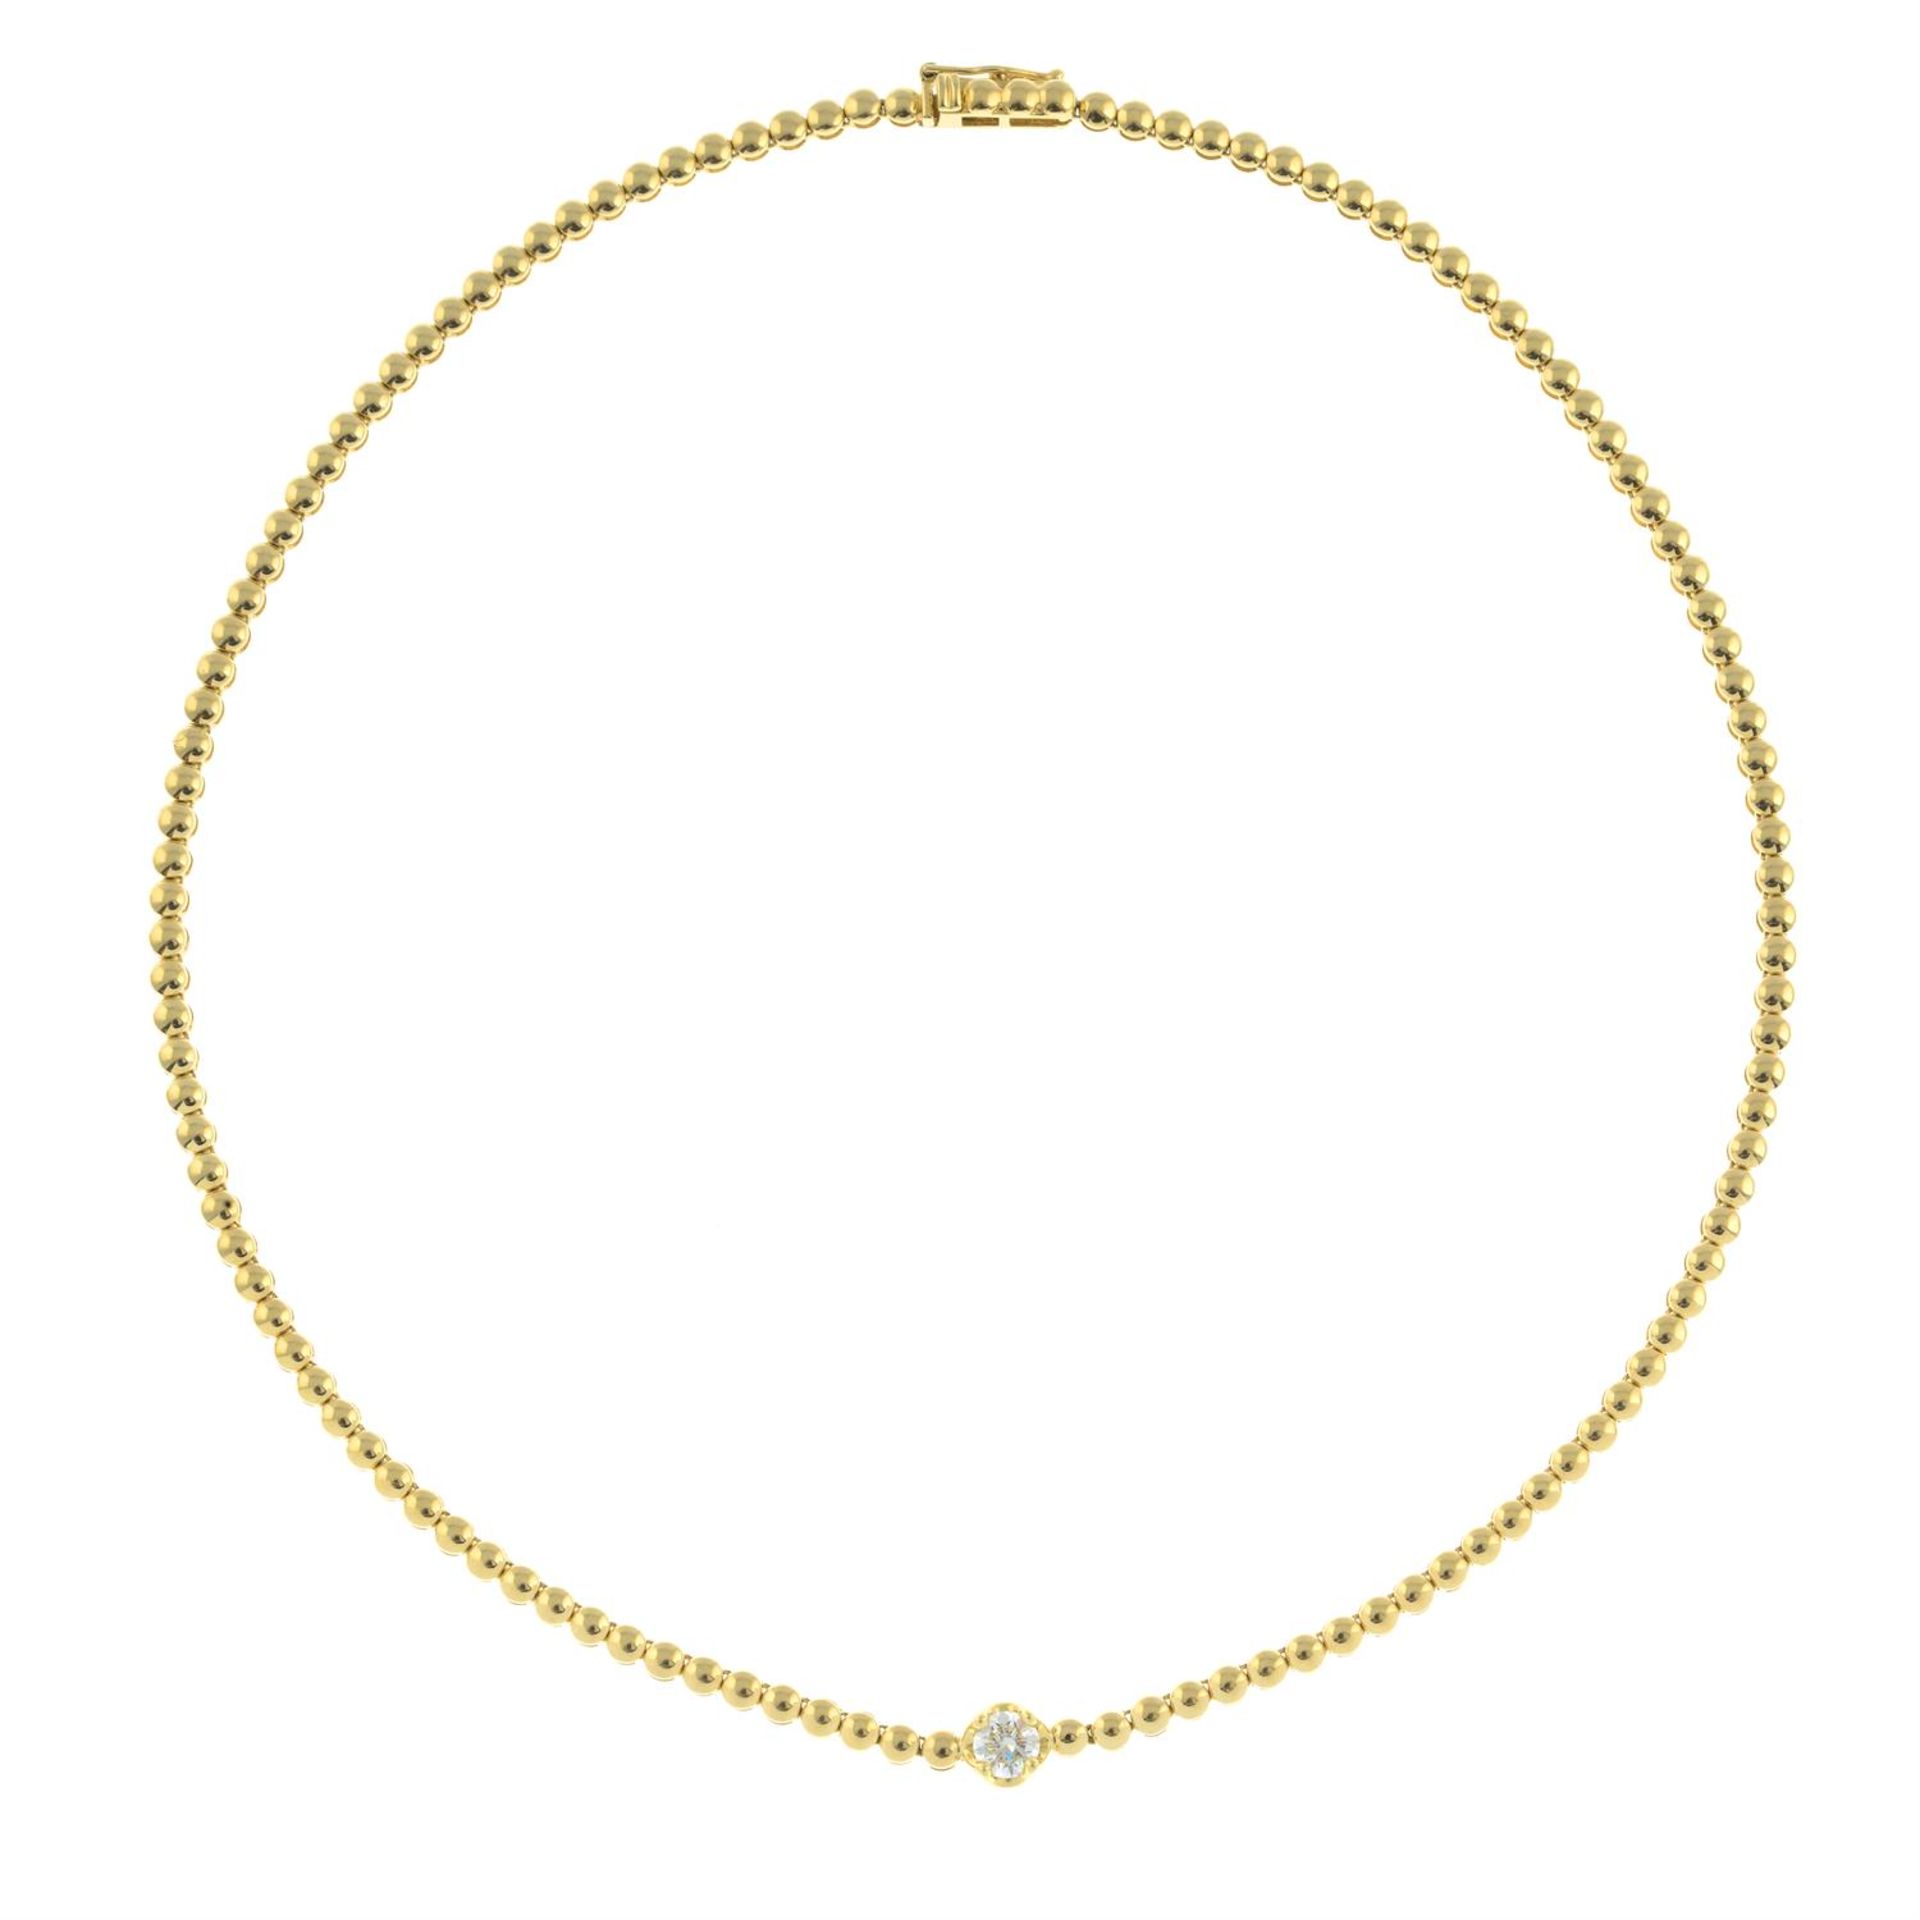 An 18ct gold brilliant-cut diamond highlight bead-link necklace, by Jennifer Meyer. - Image 3 of 5